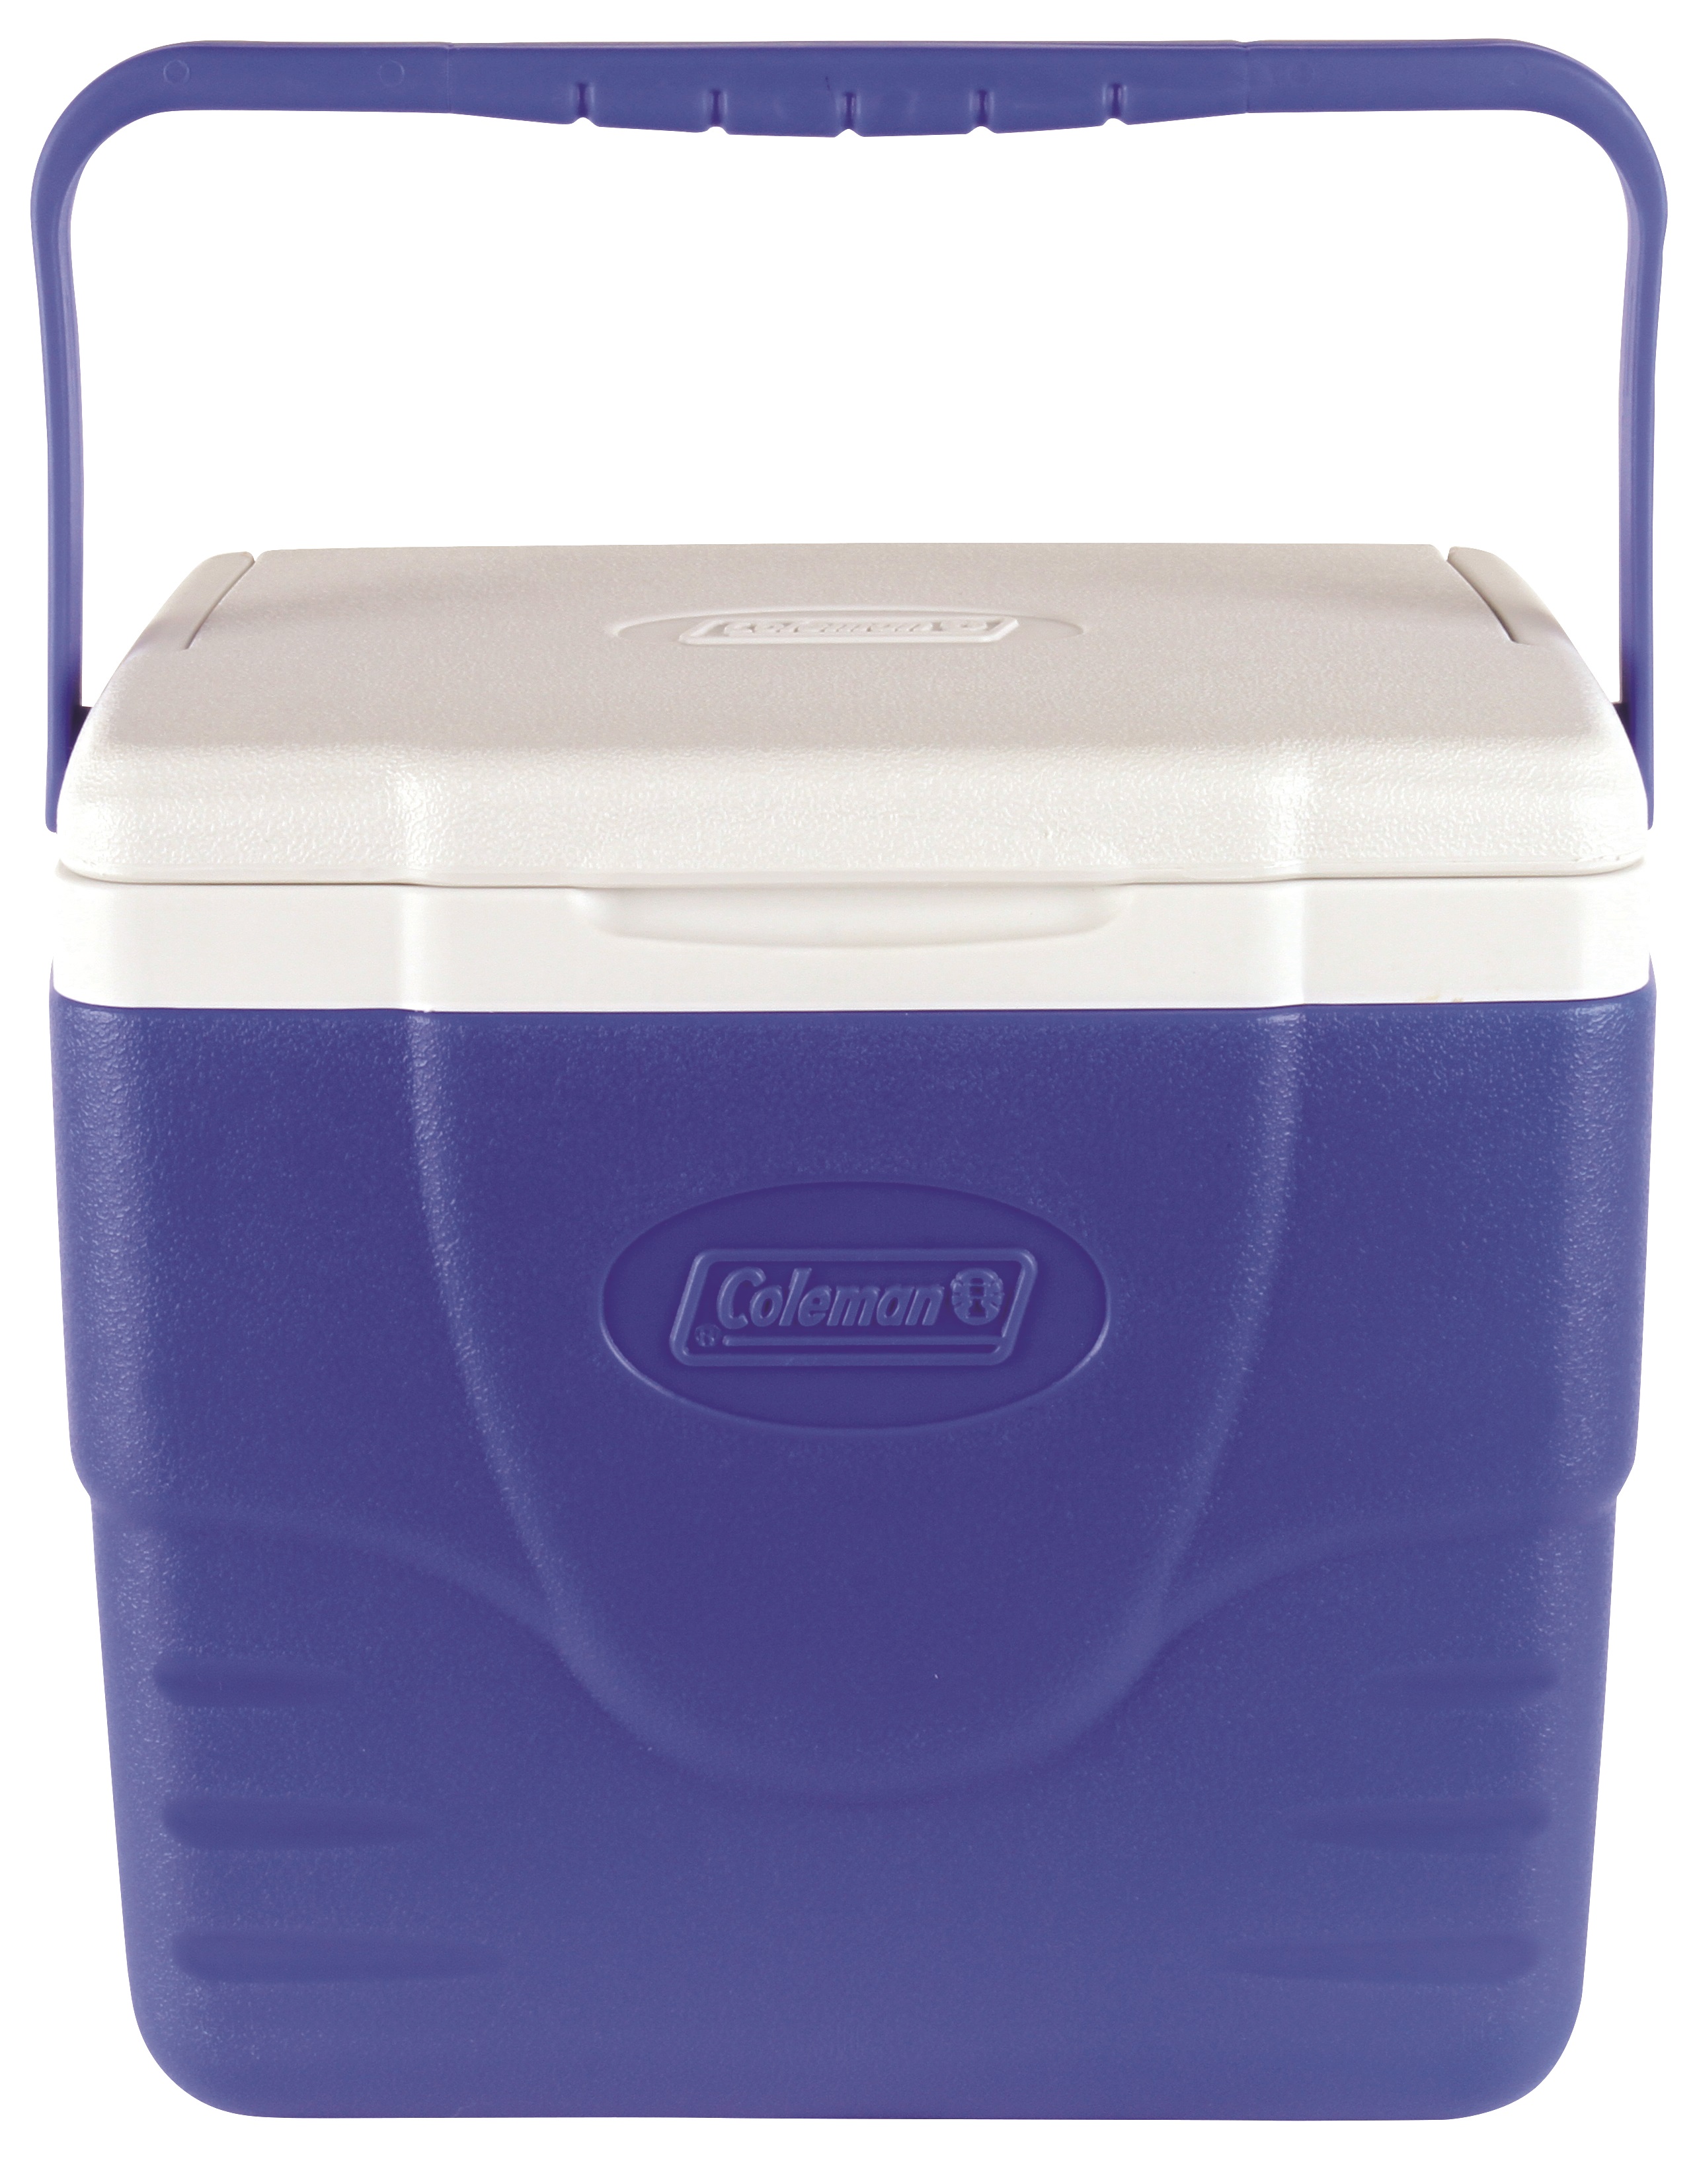 Coleman 9-Quart Cooler without Tray - image 3 of 8